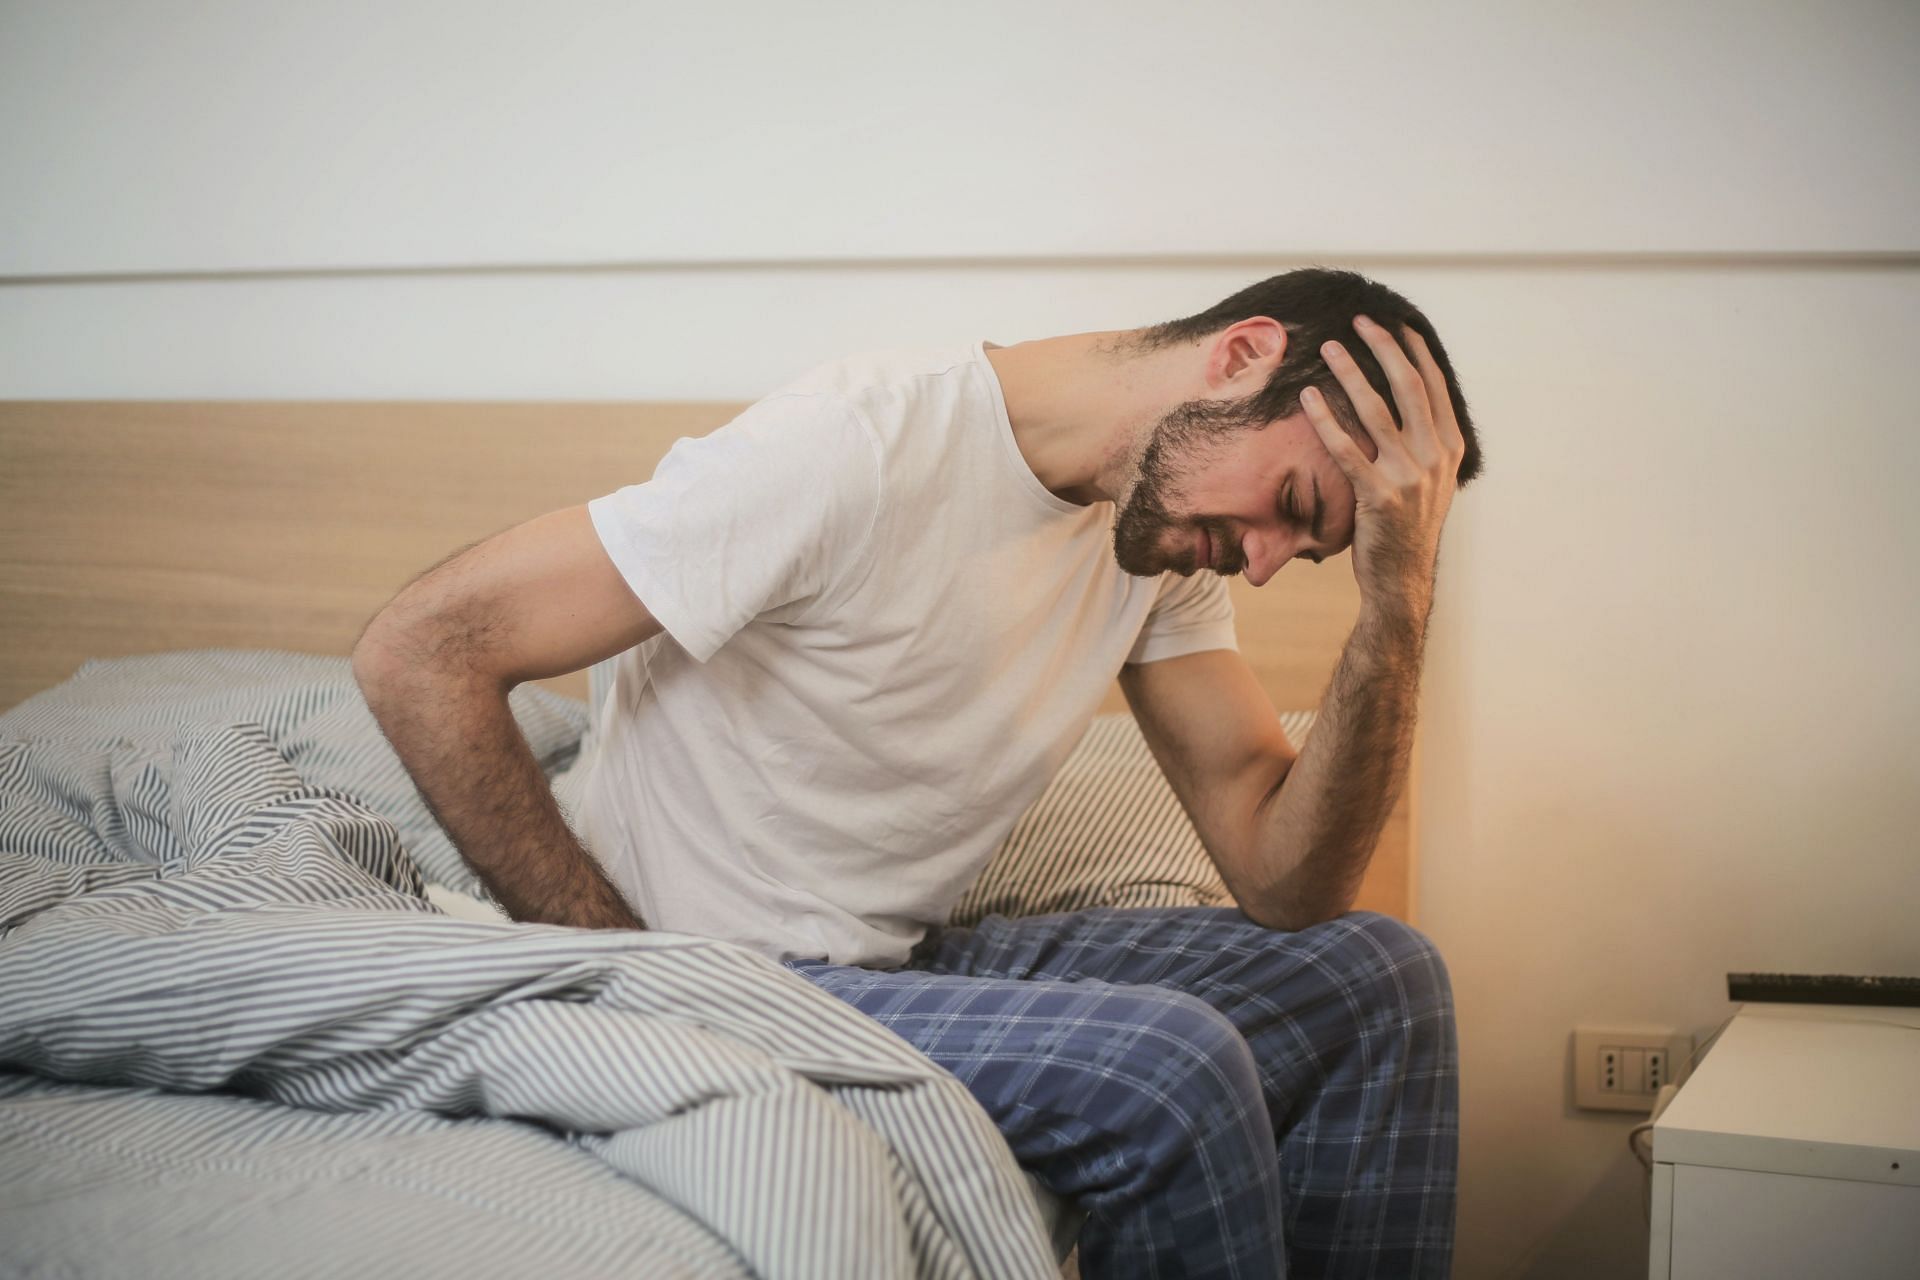 Morning headaches are common but should not be taken lightly. (Image via Pexels/ Andrea Piacquadio)